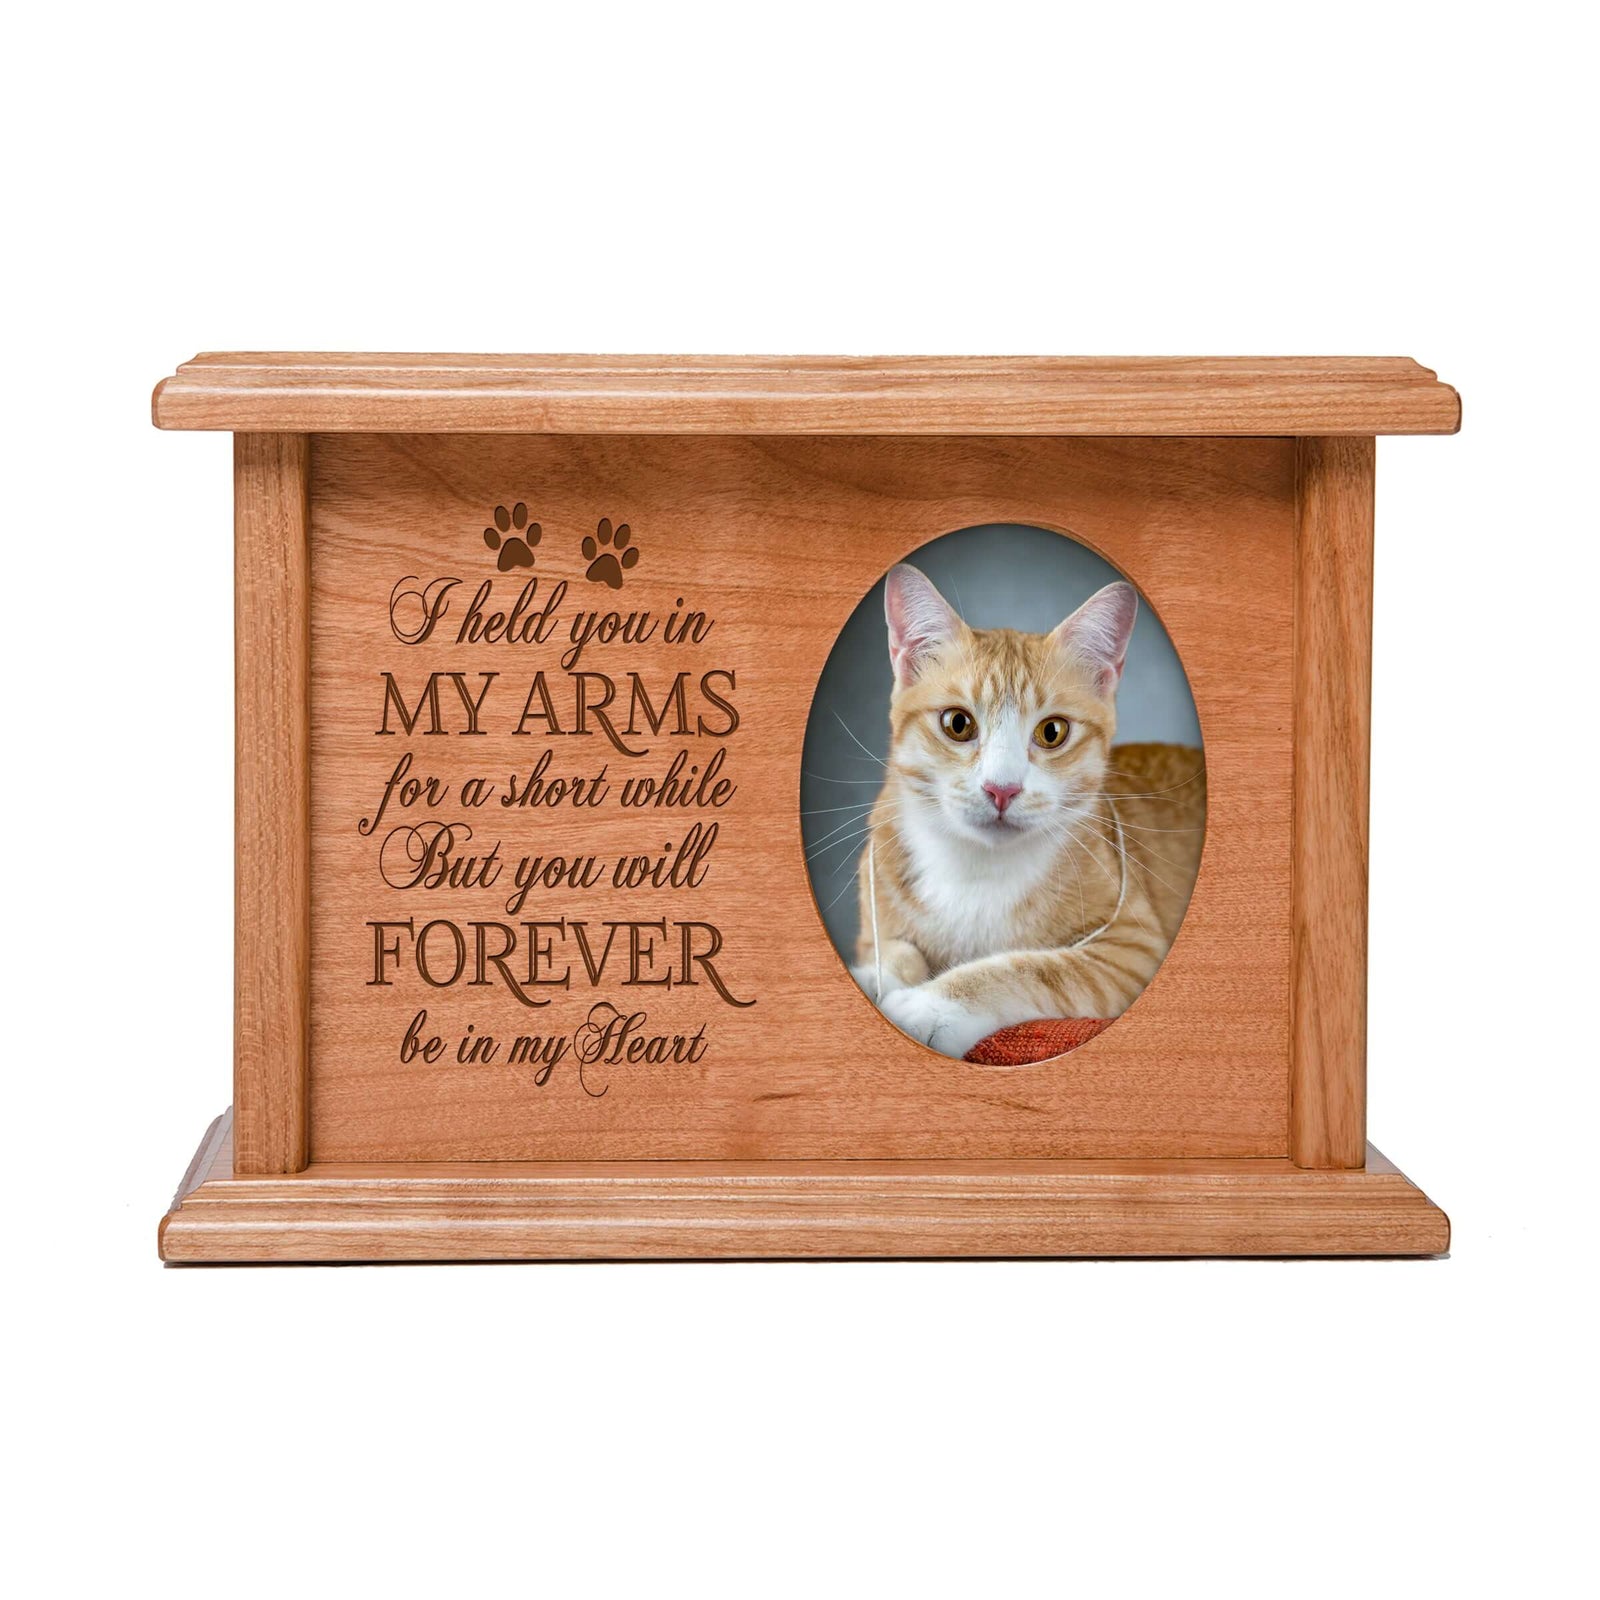 Pet Memorial Picture Cremation Urn Box for Dog or Cat - I Held You In My Arms